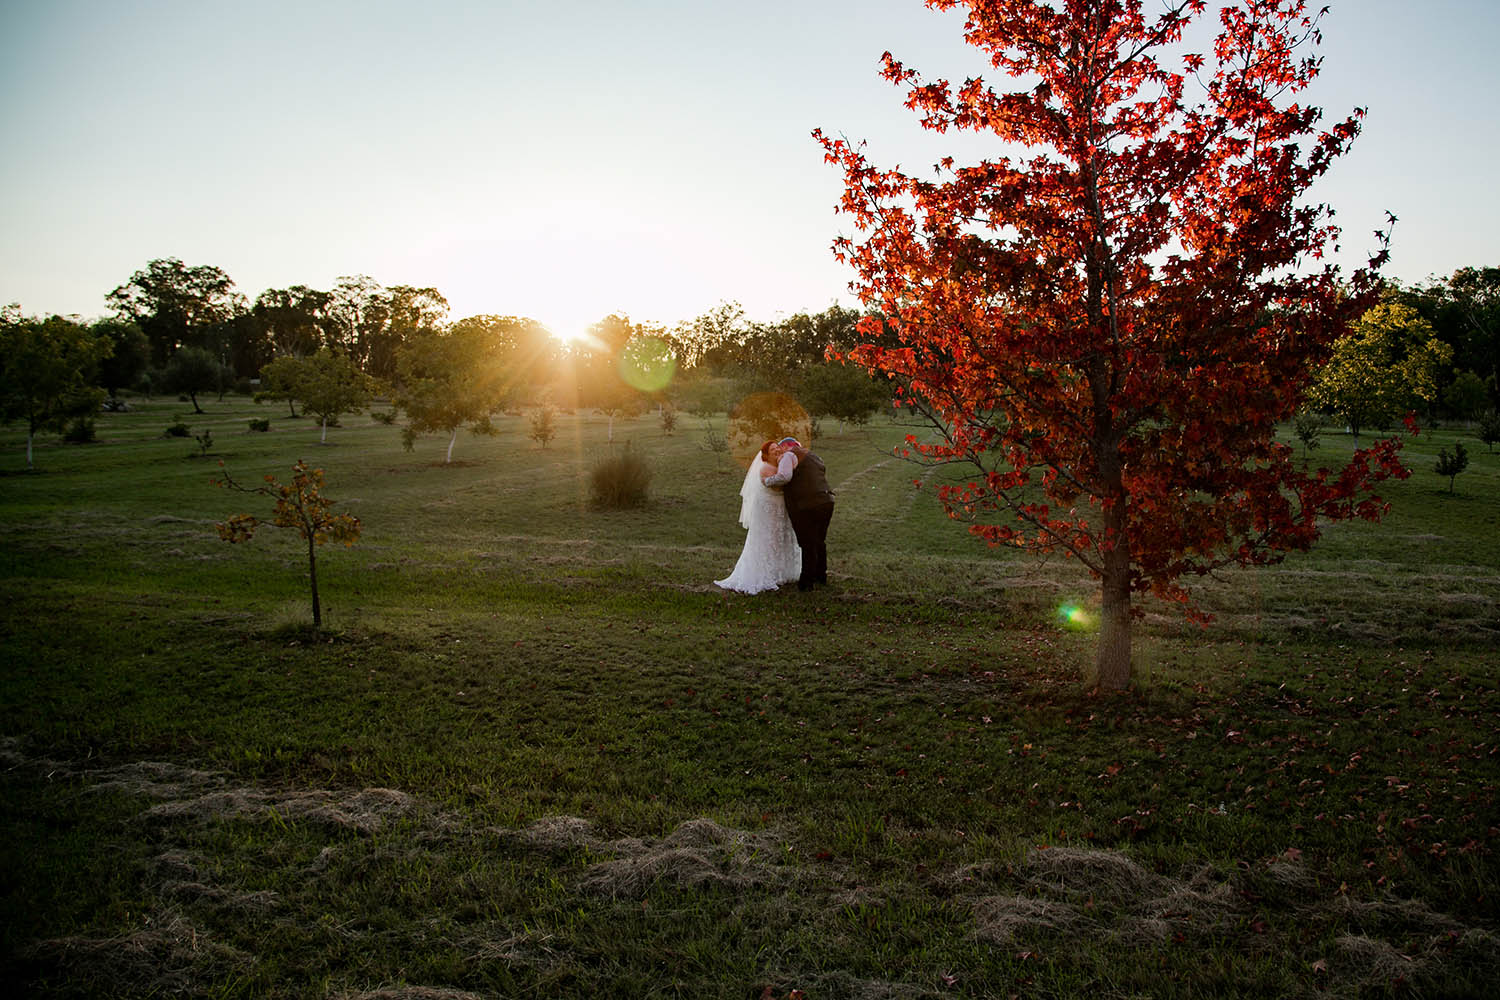 Wedding Photography - Couple in field